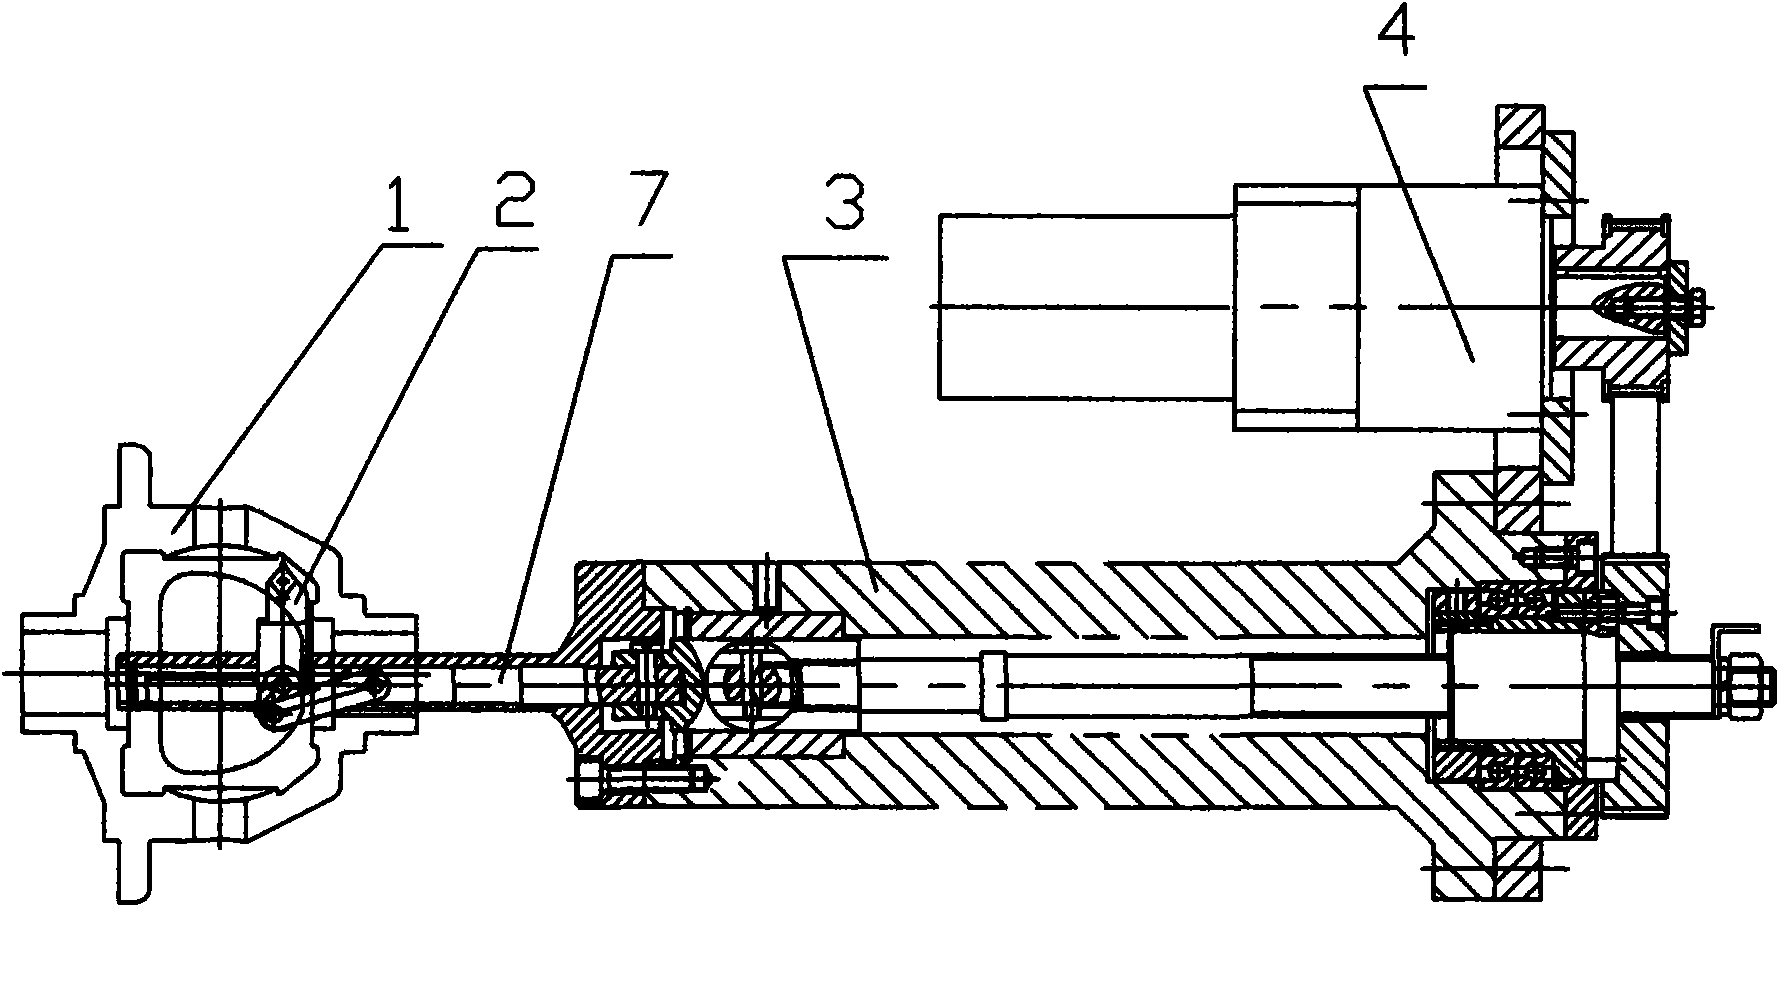 Processing technique capable of processing interior parts of integral differential mechanism casing by one step